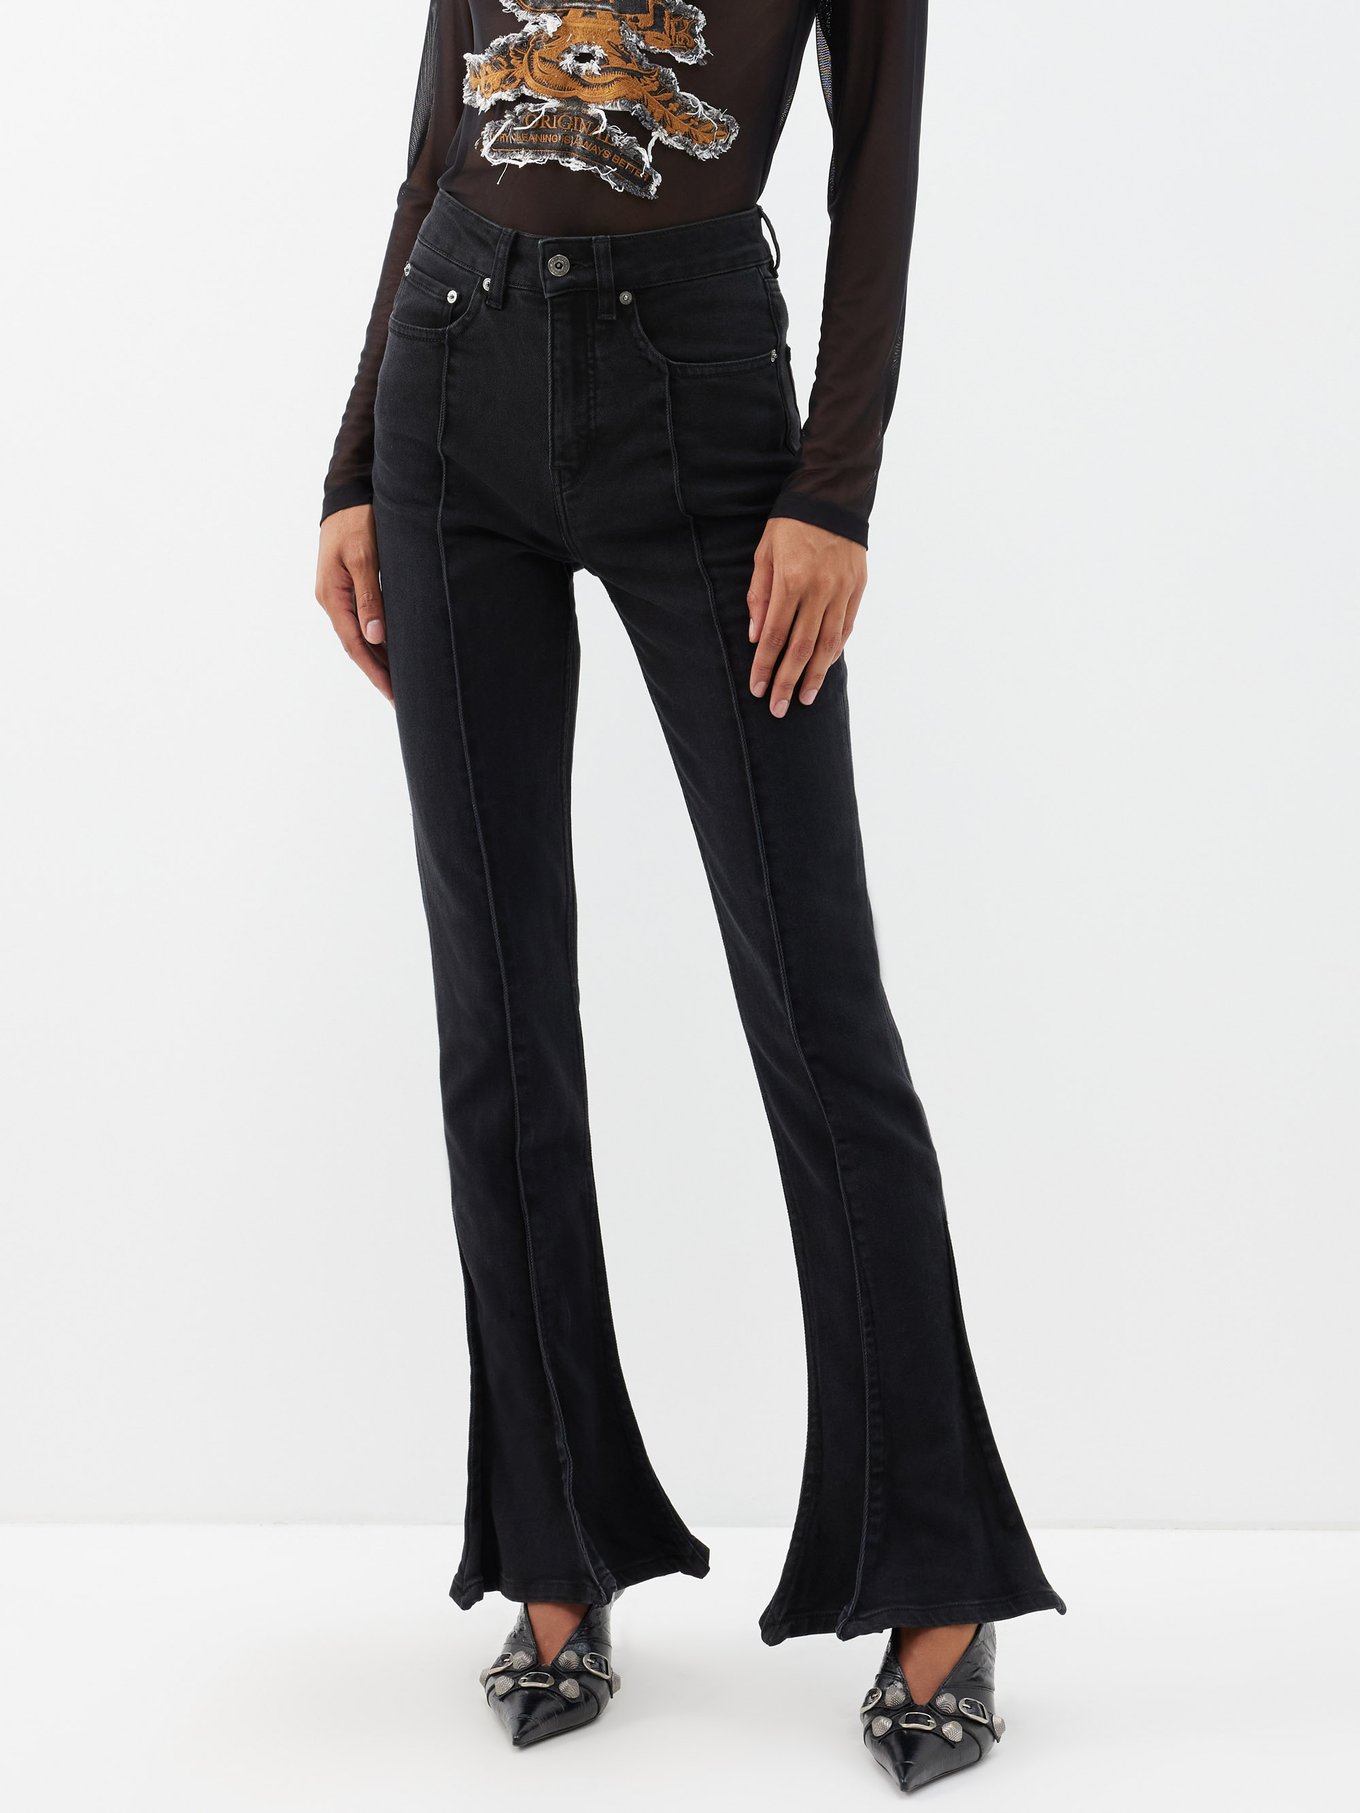 Black Trumpet flared jeans | Y/Project | MATCHES US